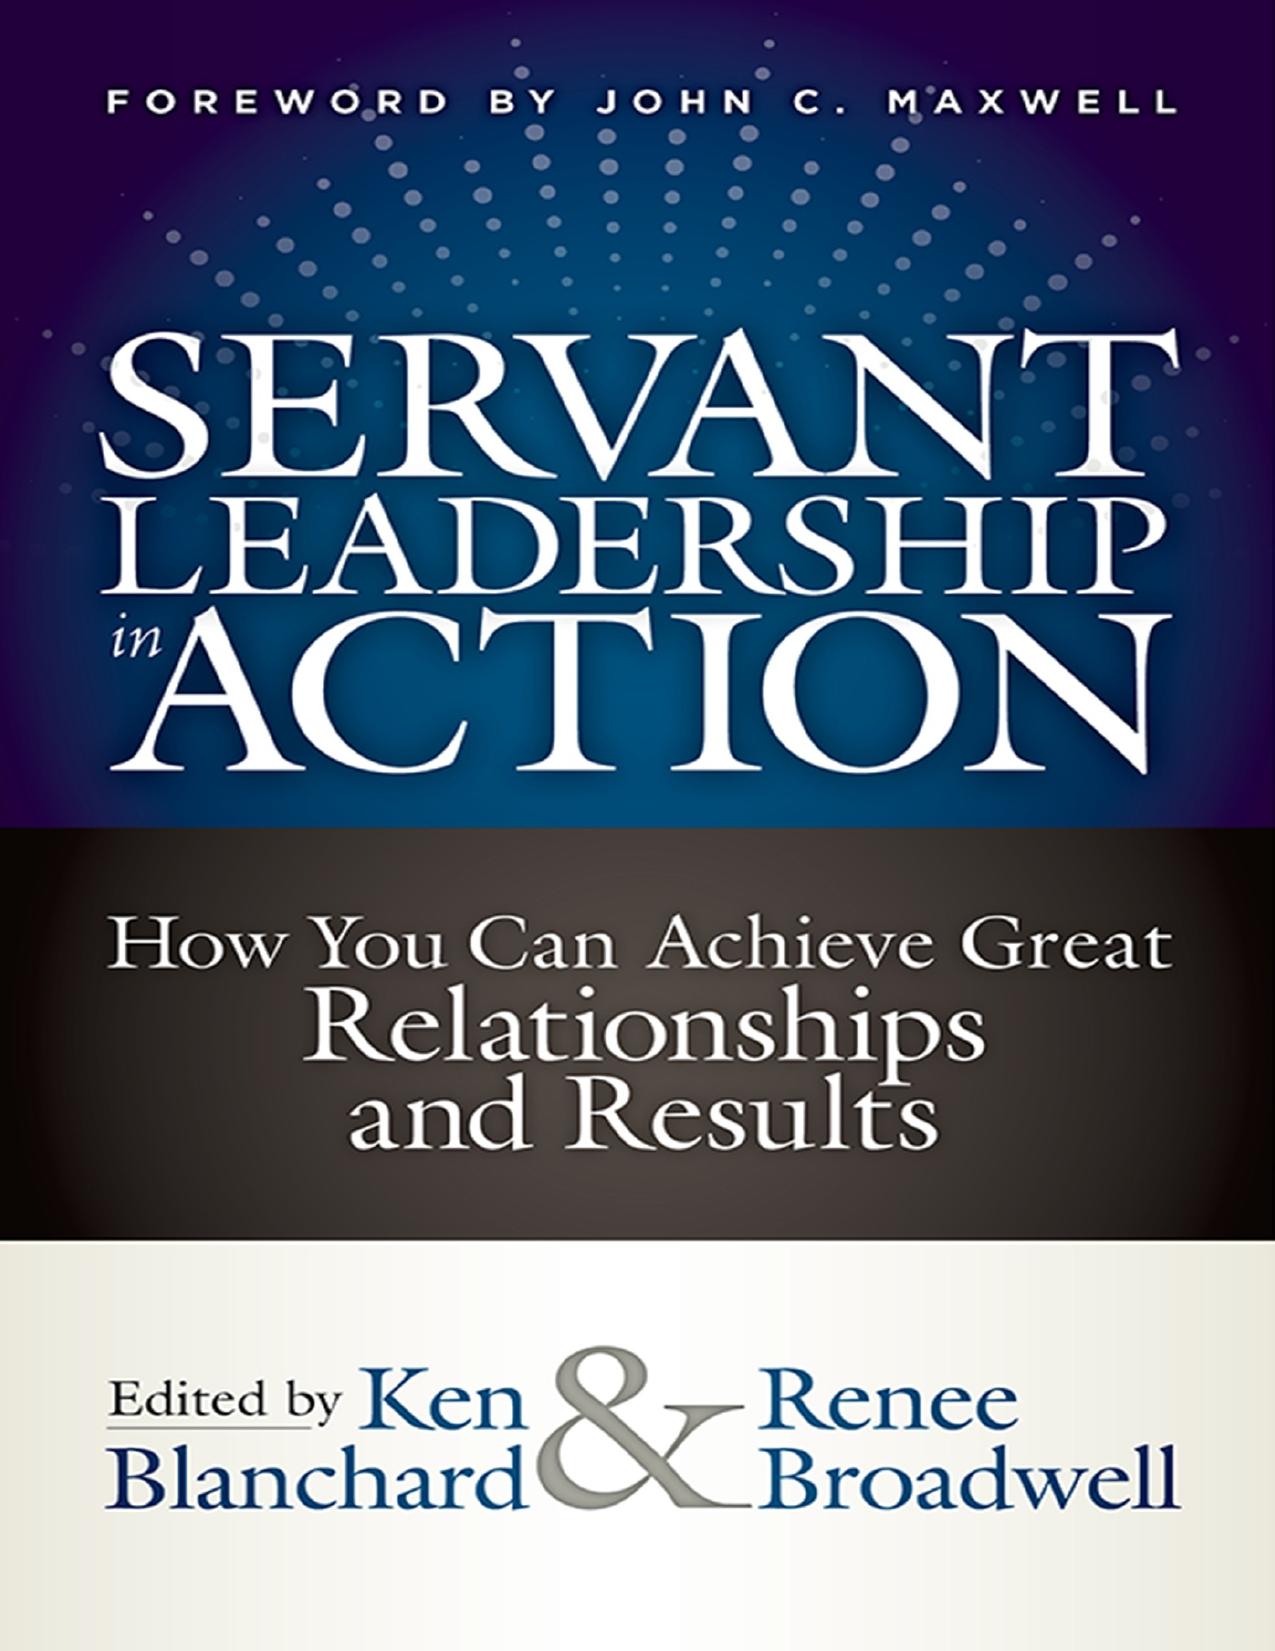 Servant Leadership in Action: How You Can Achieve Great Relationships and Results - PDFDrive.com